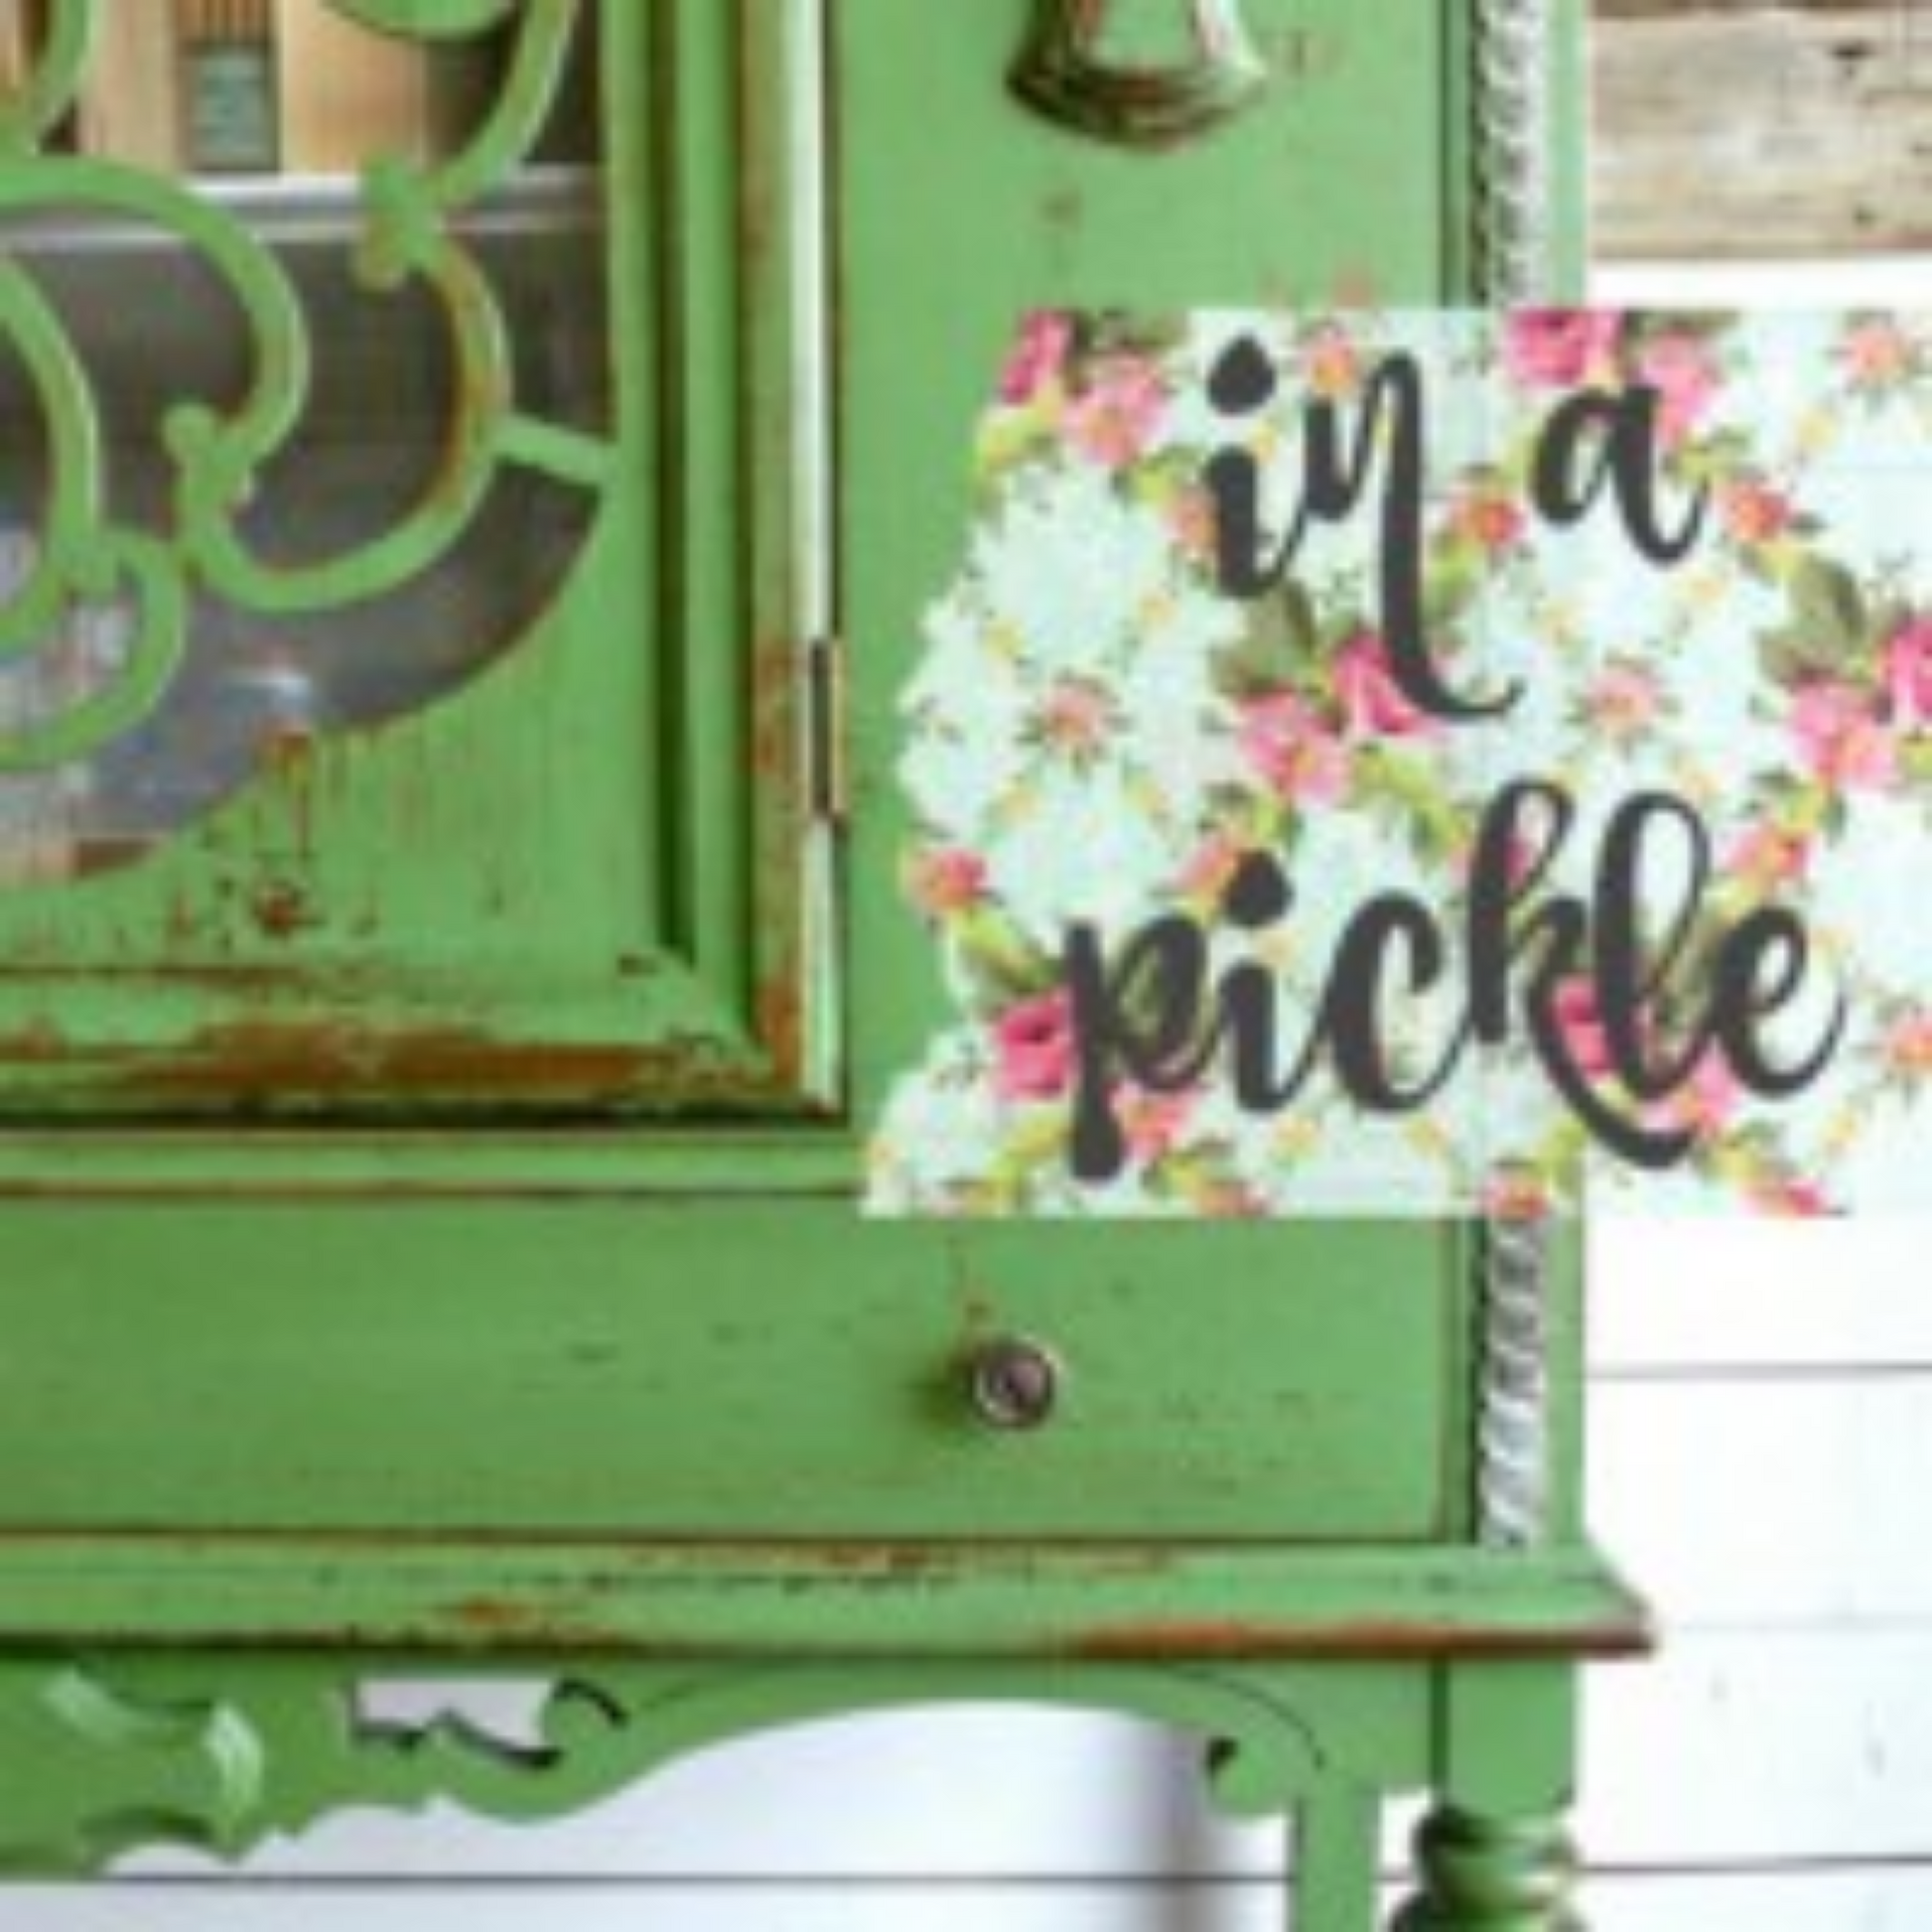 Antique China Closet painted in In a Pickle (green) by Sweet Pickins Milk Paint available at Milton's Daughter